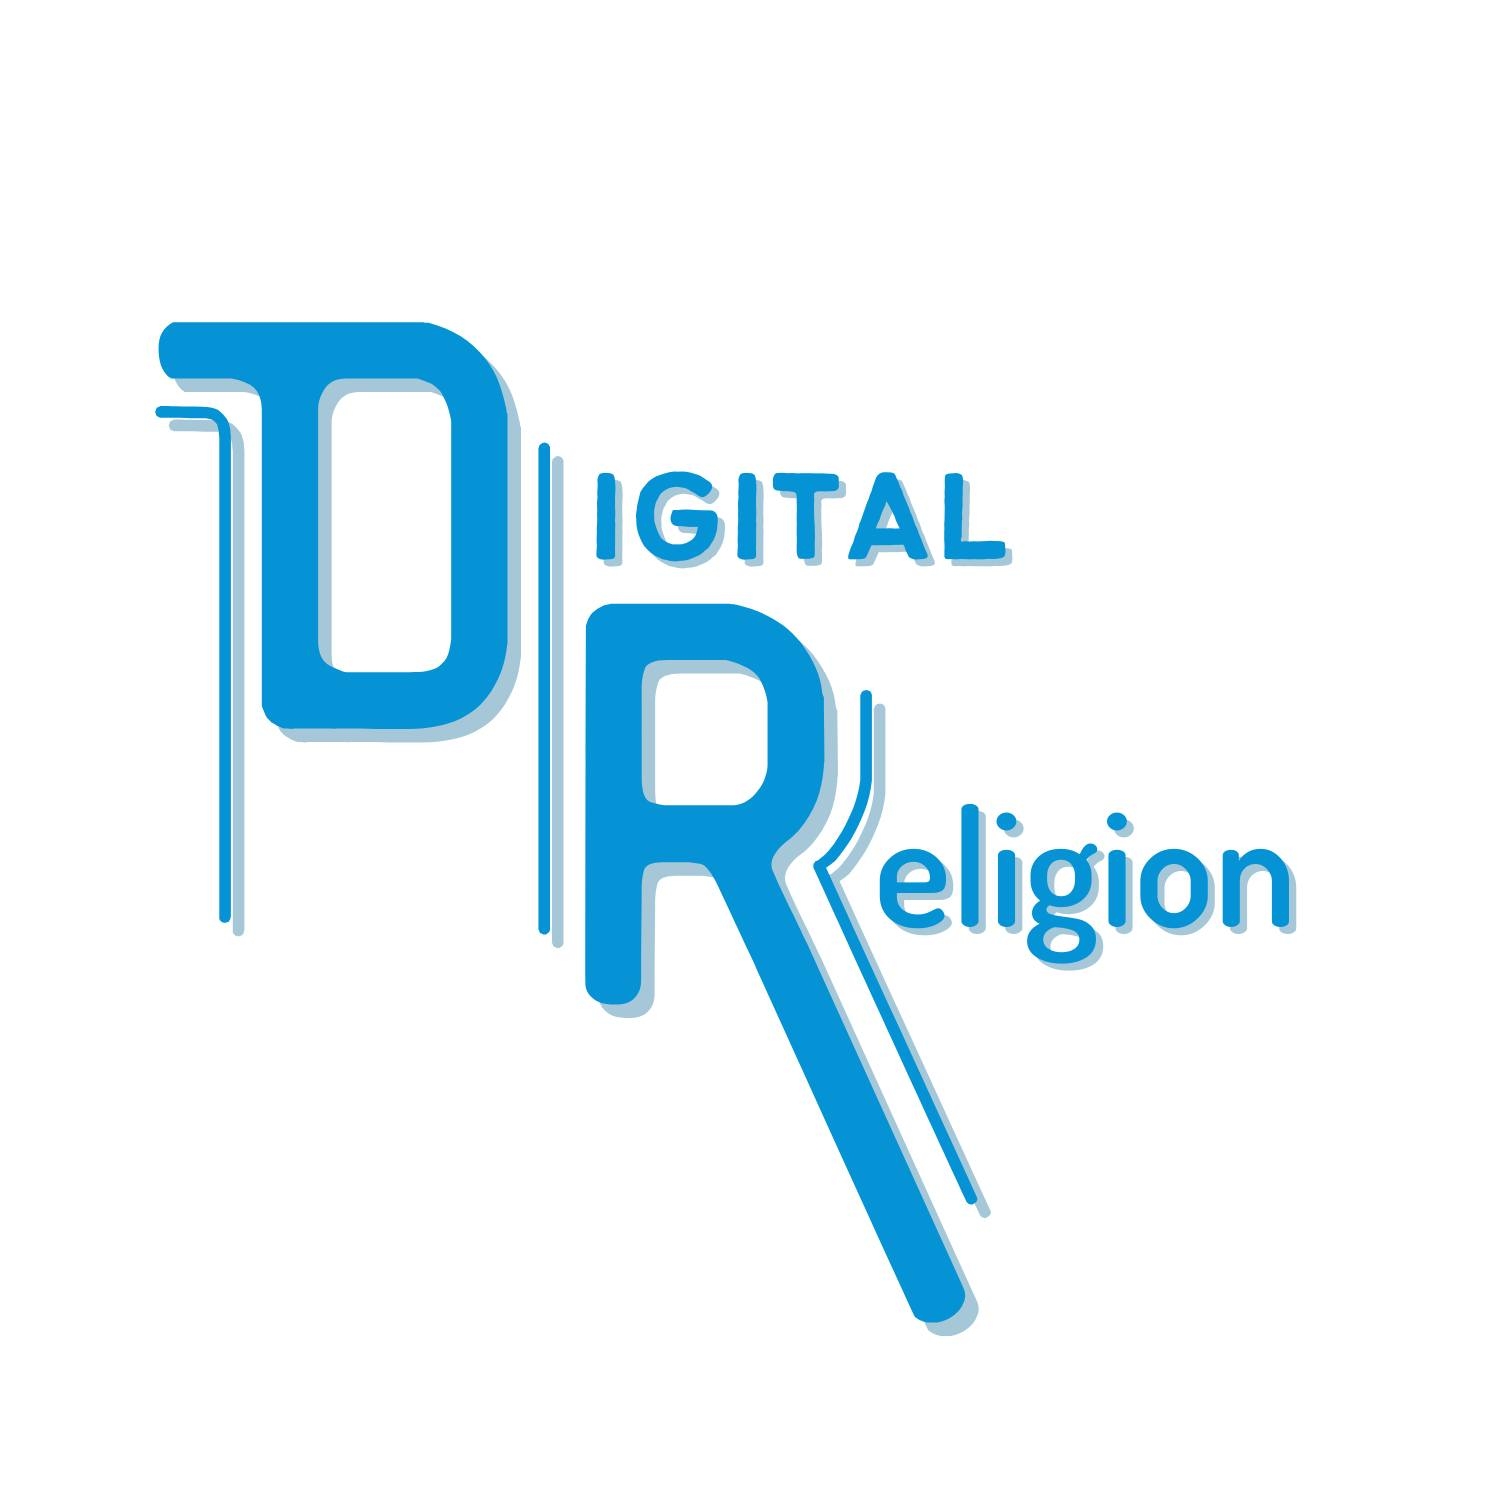 Network for New Media, Religion and Digital Culture Studies.'s avatar